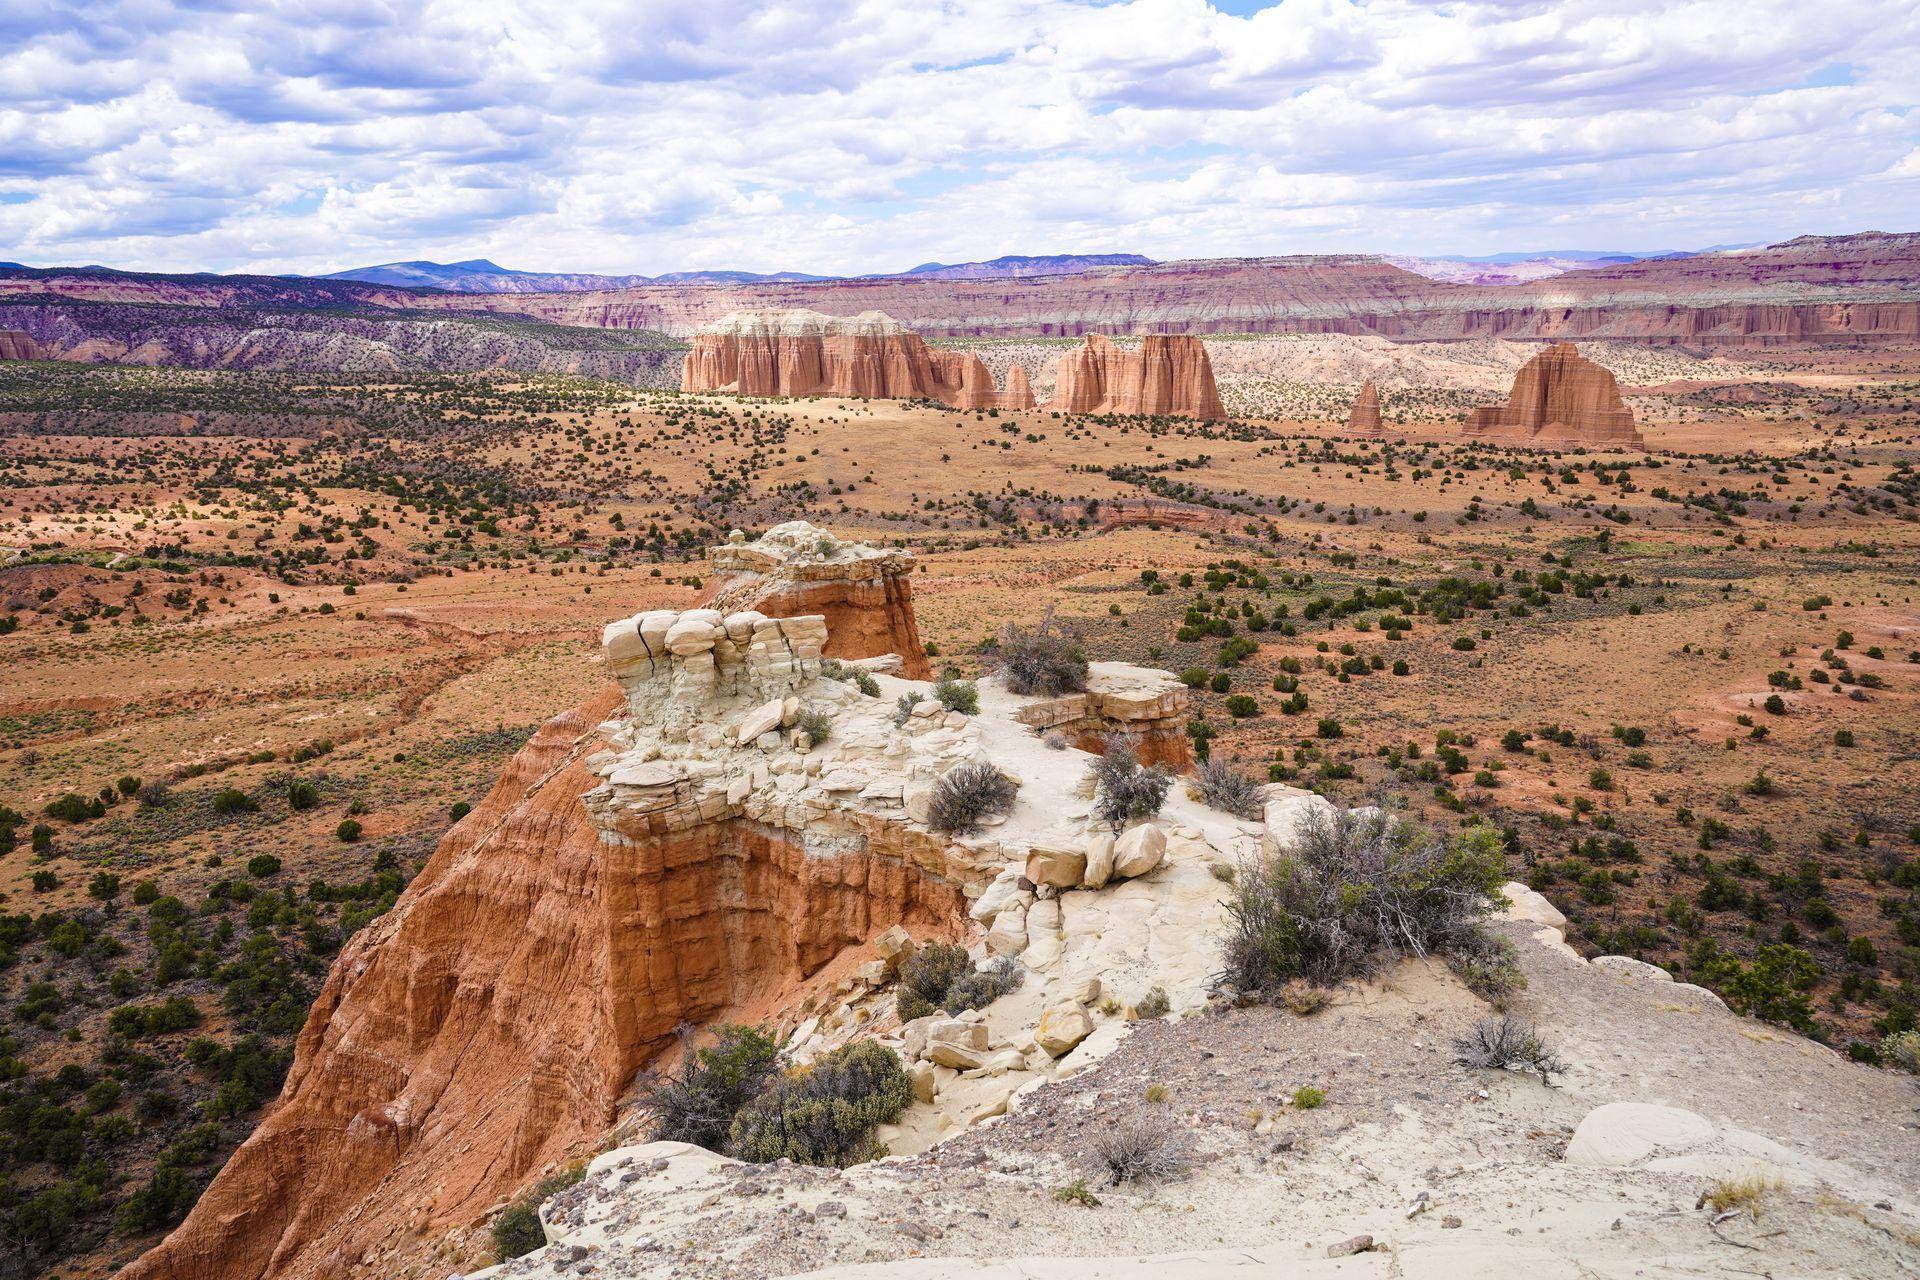 An expansive valley with various orange, rock formations with white caps. This iconic view is located in the Cathedral Valley area of Capitol Reef.